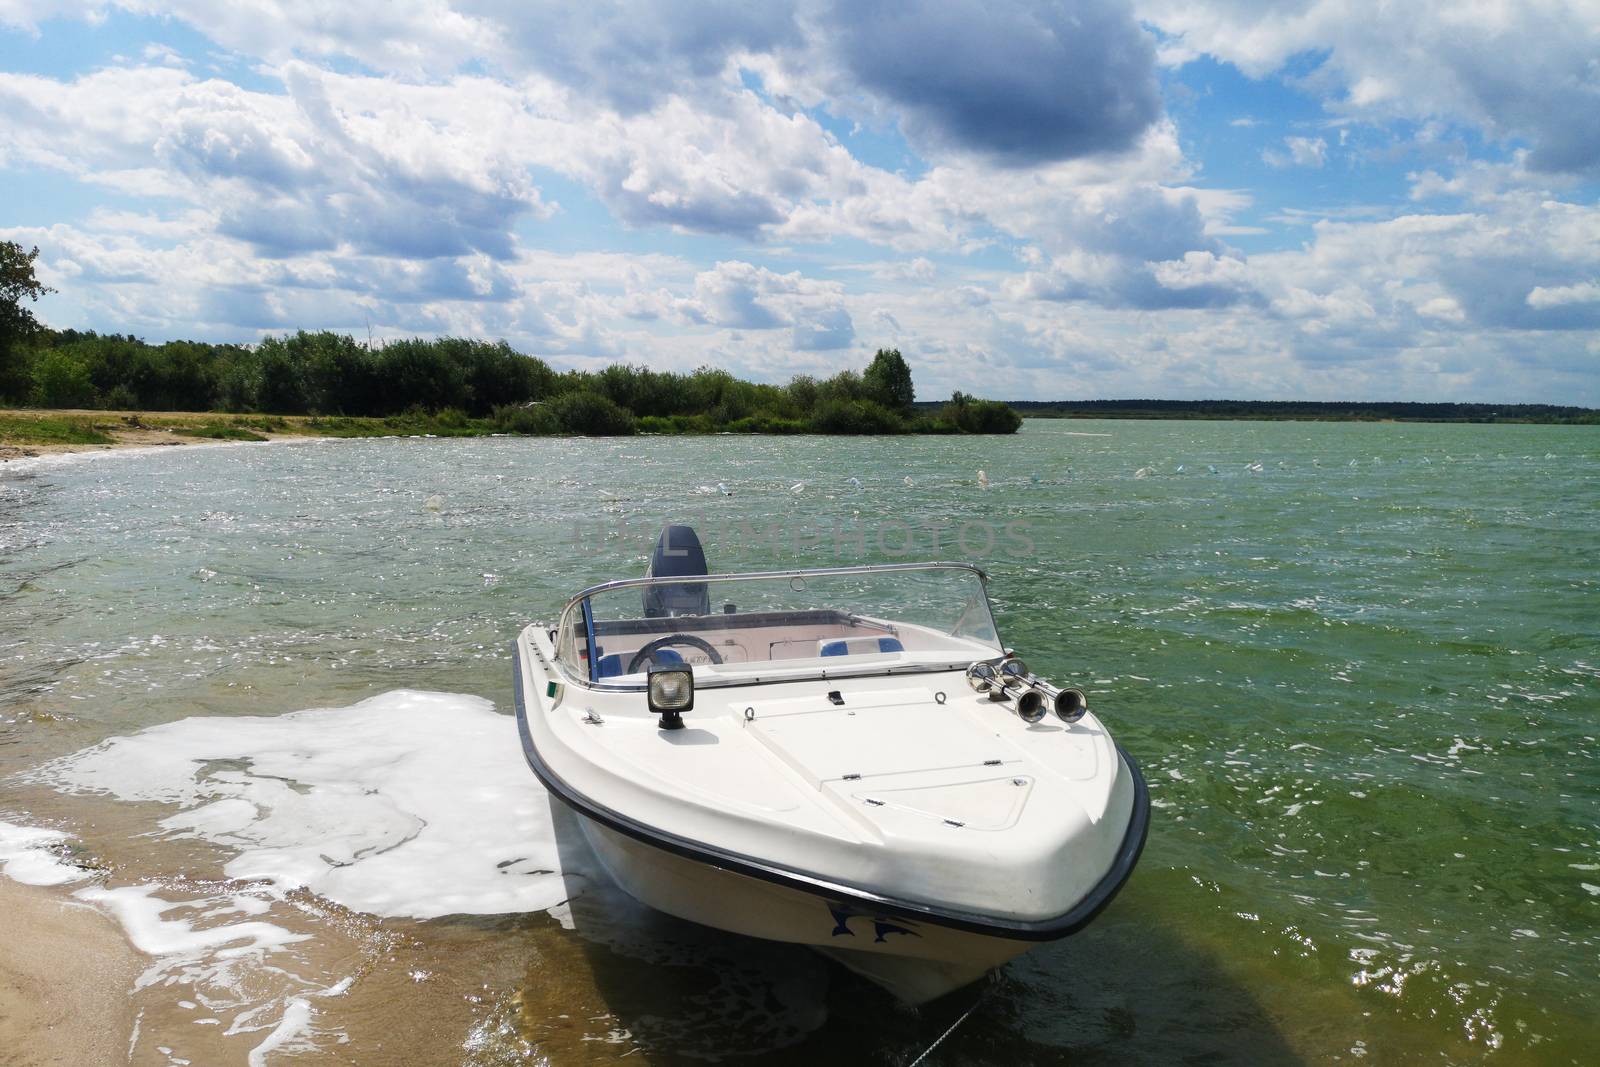 White motor boat motorboat stands near the shore of the lake against the background of blue sky with clouds.